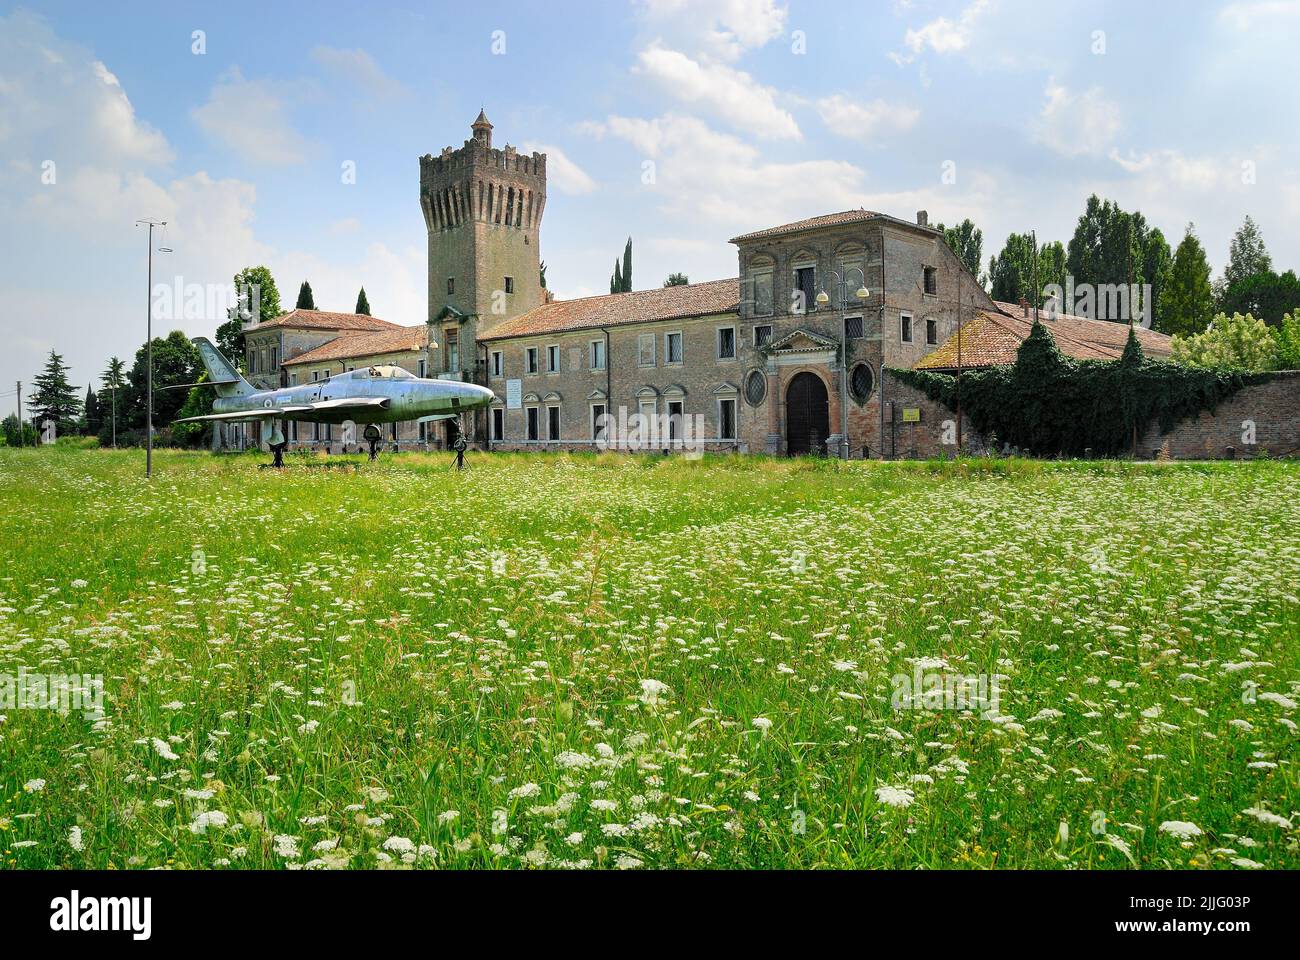 Due Carrare, Veneto, Italy. San Pelagio castle. The castle houses the museum of flight. During WWI Italian planes took off from the meadow. The castle hosted Gabriele D'Annunzio who took off from this airfield to complete the feat of flying over Vienna. On the field an airplane Republic RF-84F Thunderflash. Stock Photo